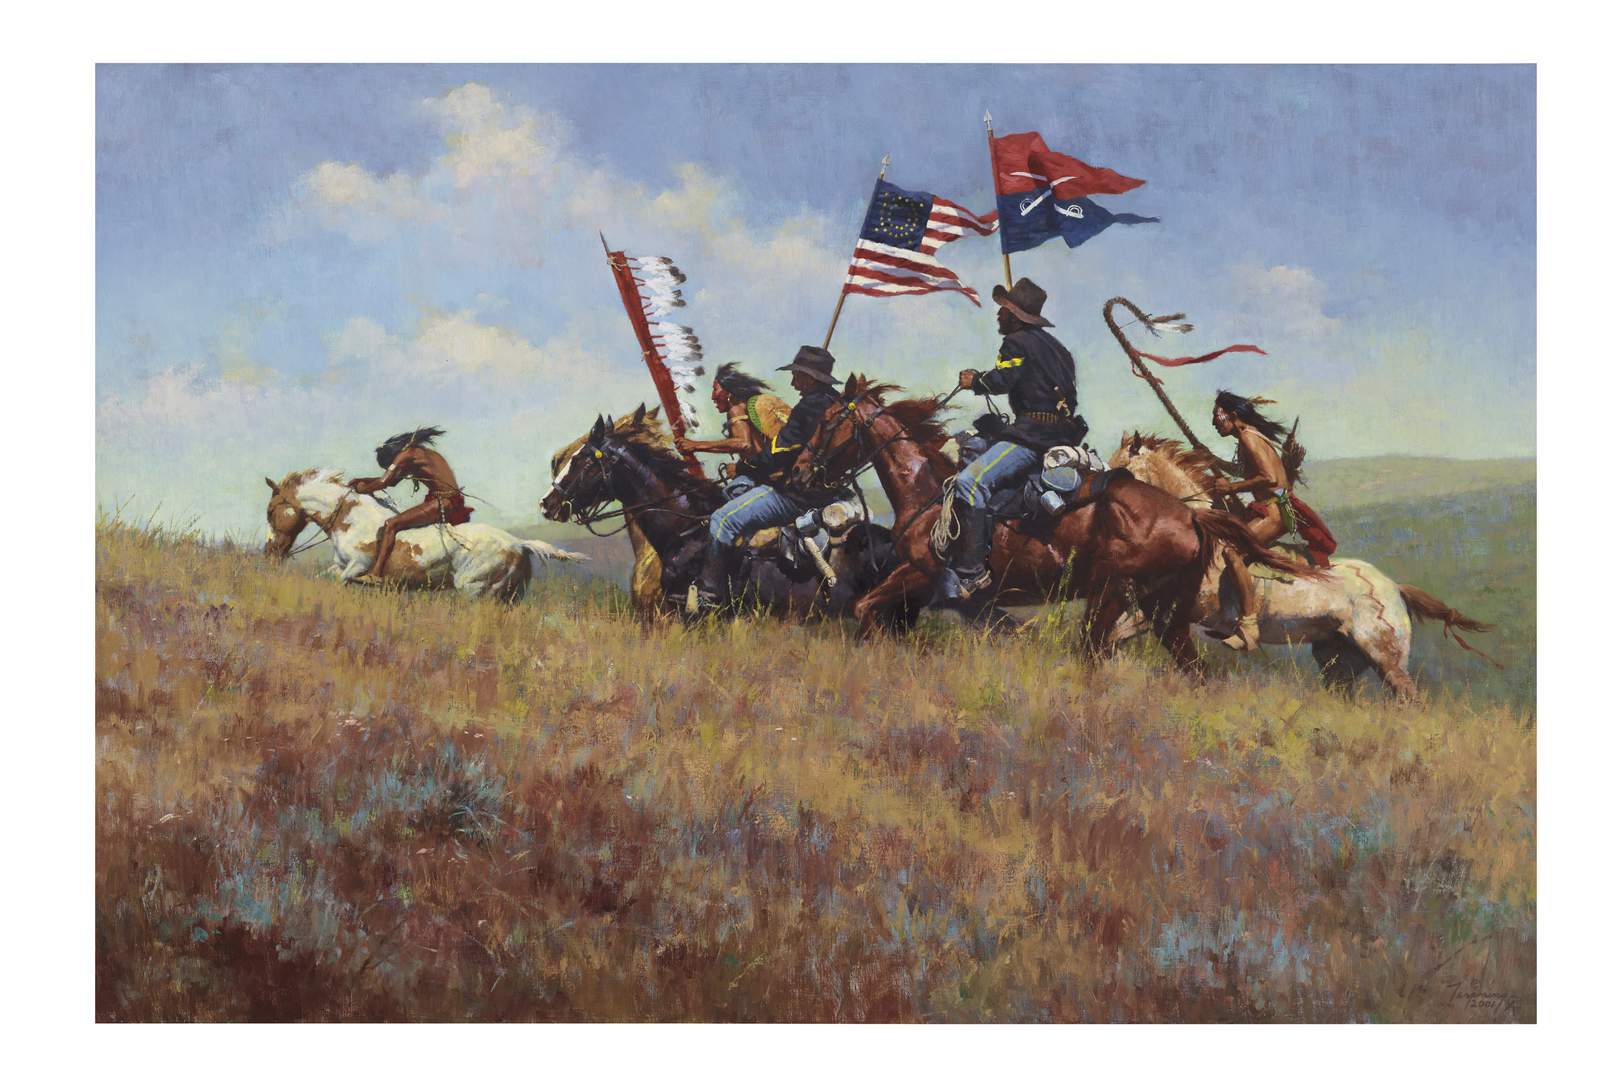 Western art collected by T. Boone Pickens offered at auction